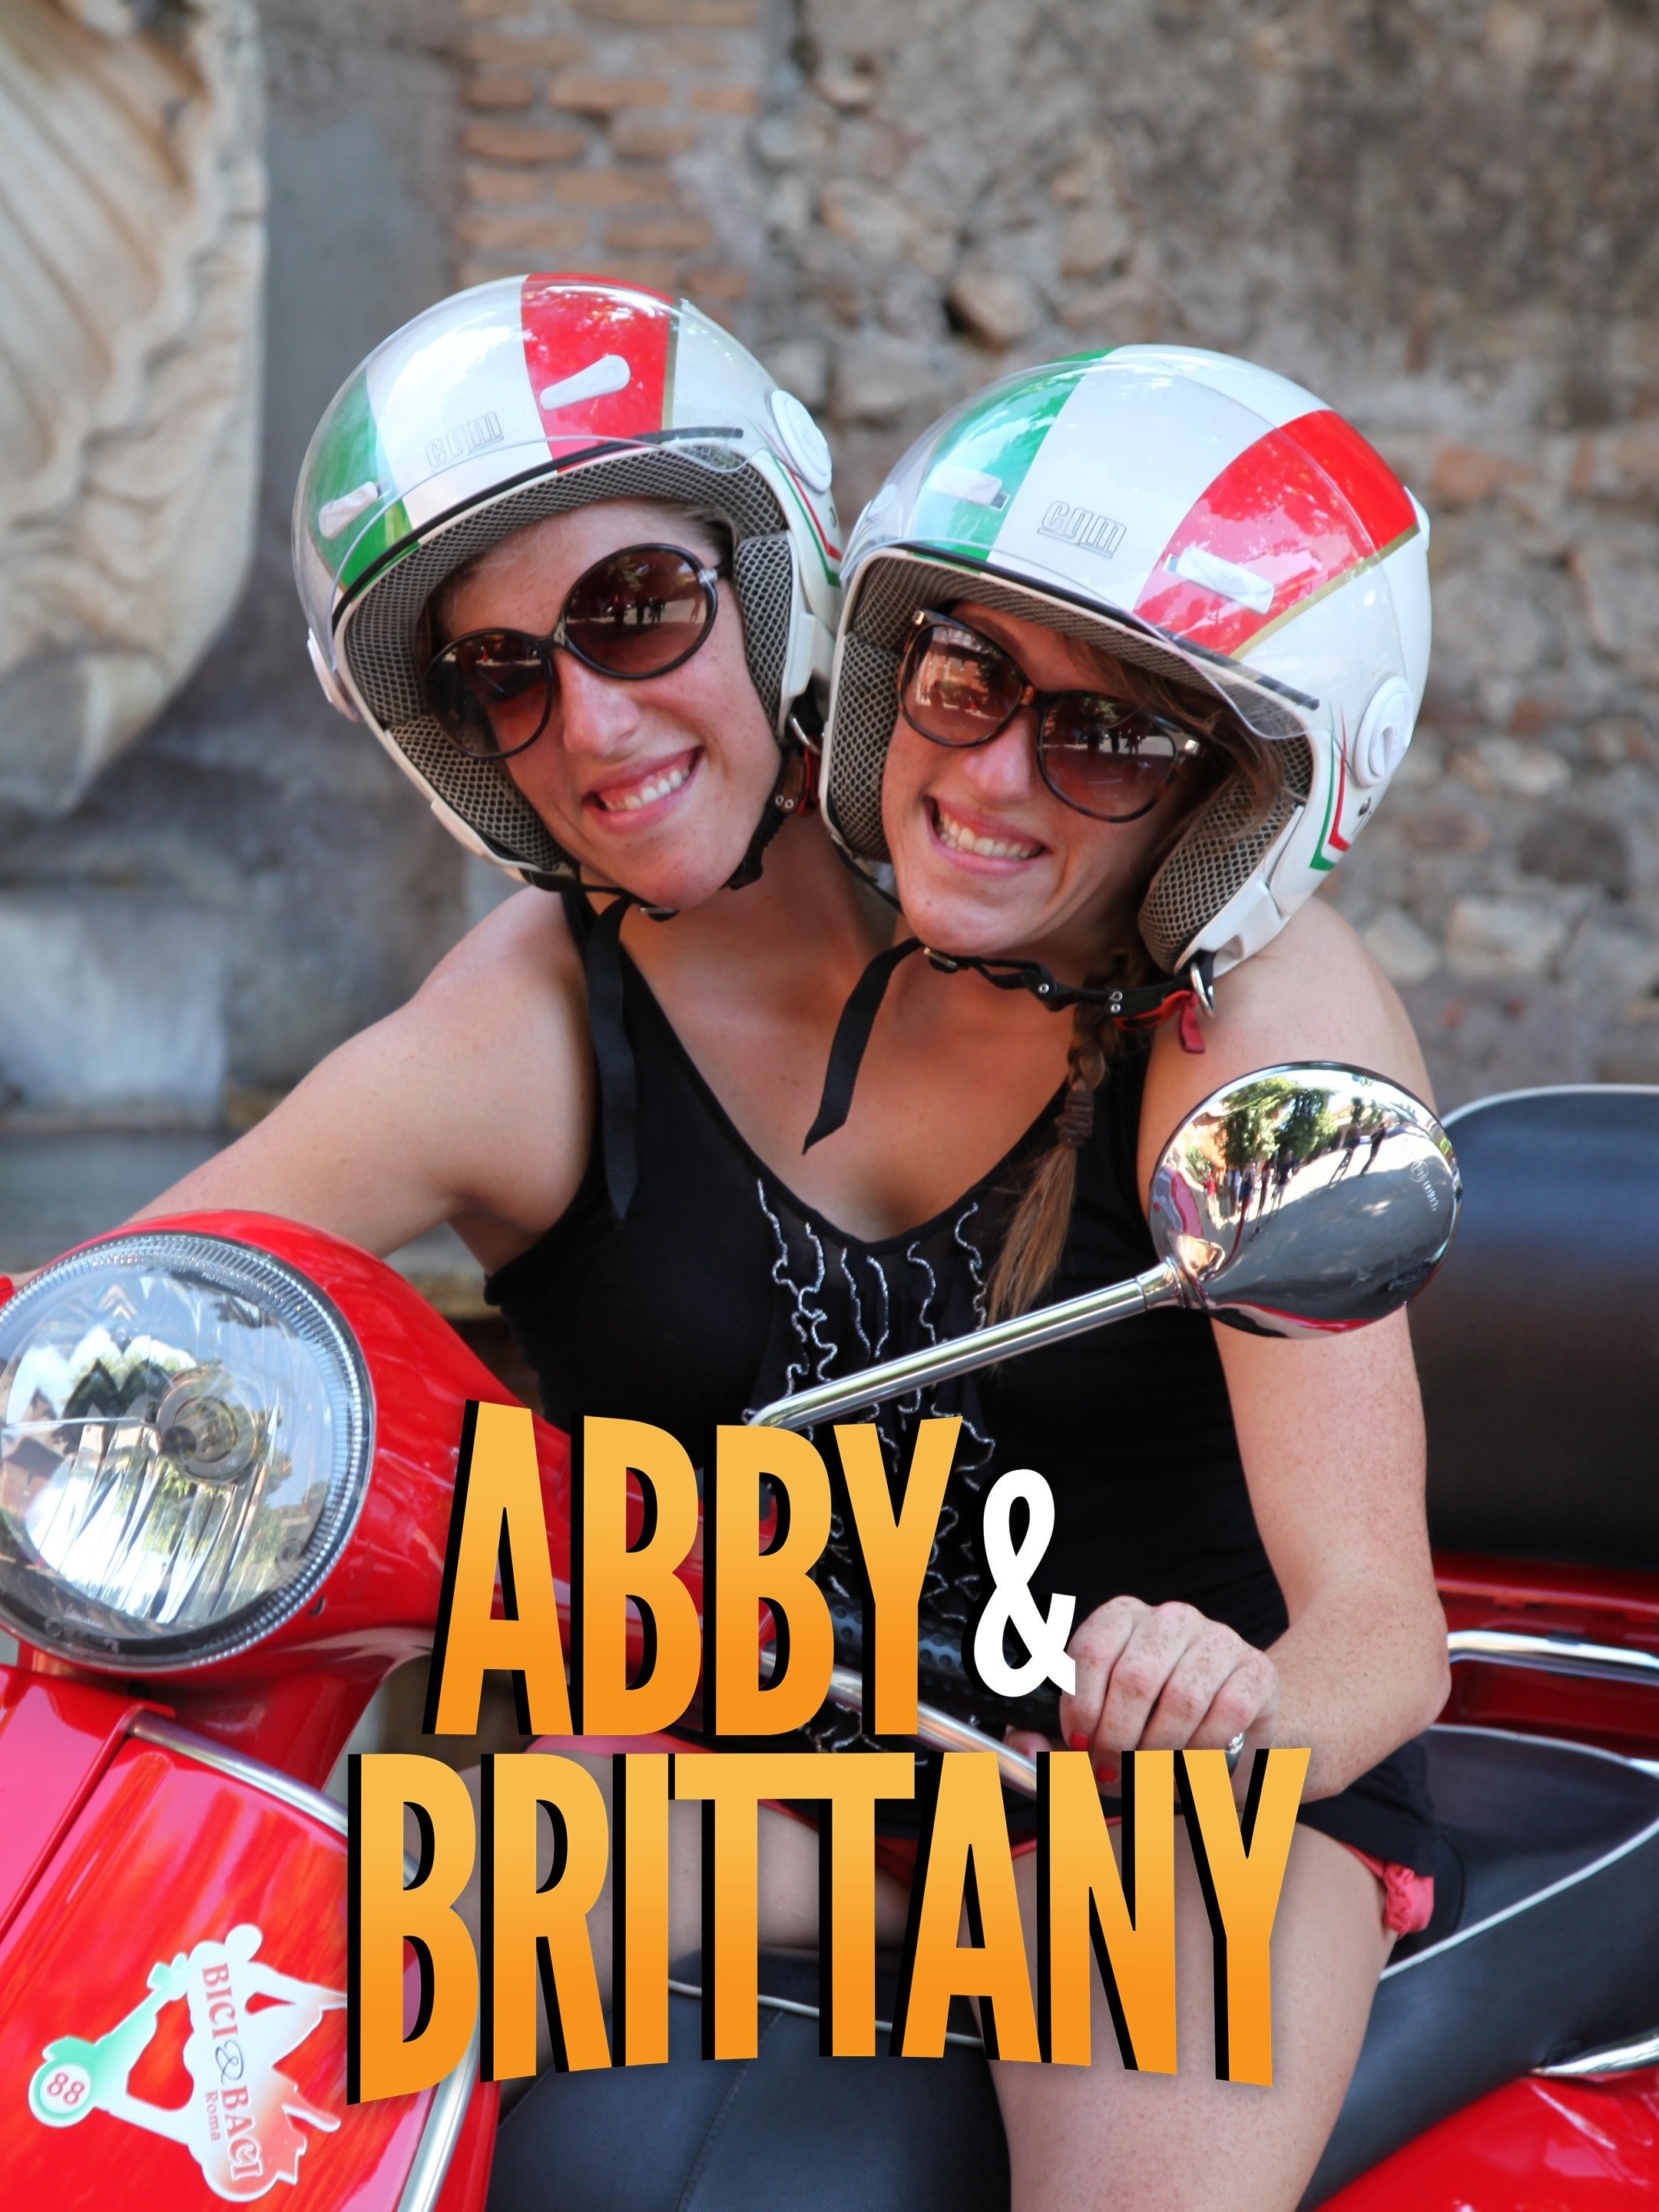 Abby and Brittany: Joined for Life on BBC3, TV Show, Episodes, Reviews and  List